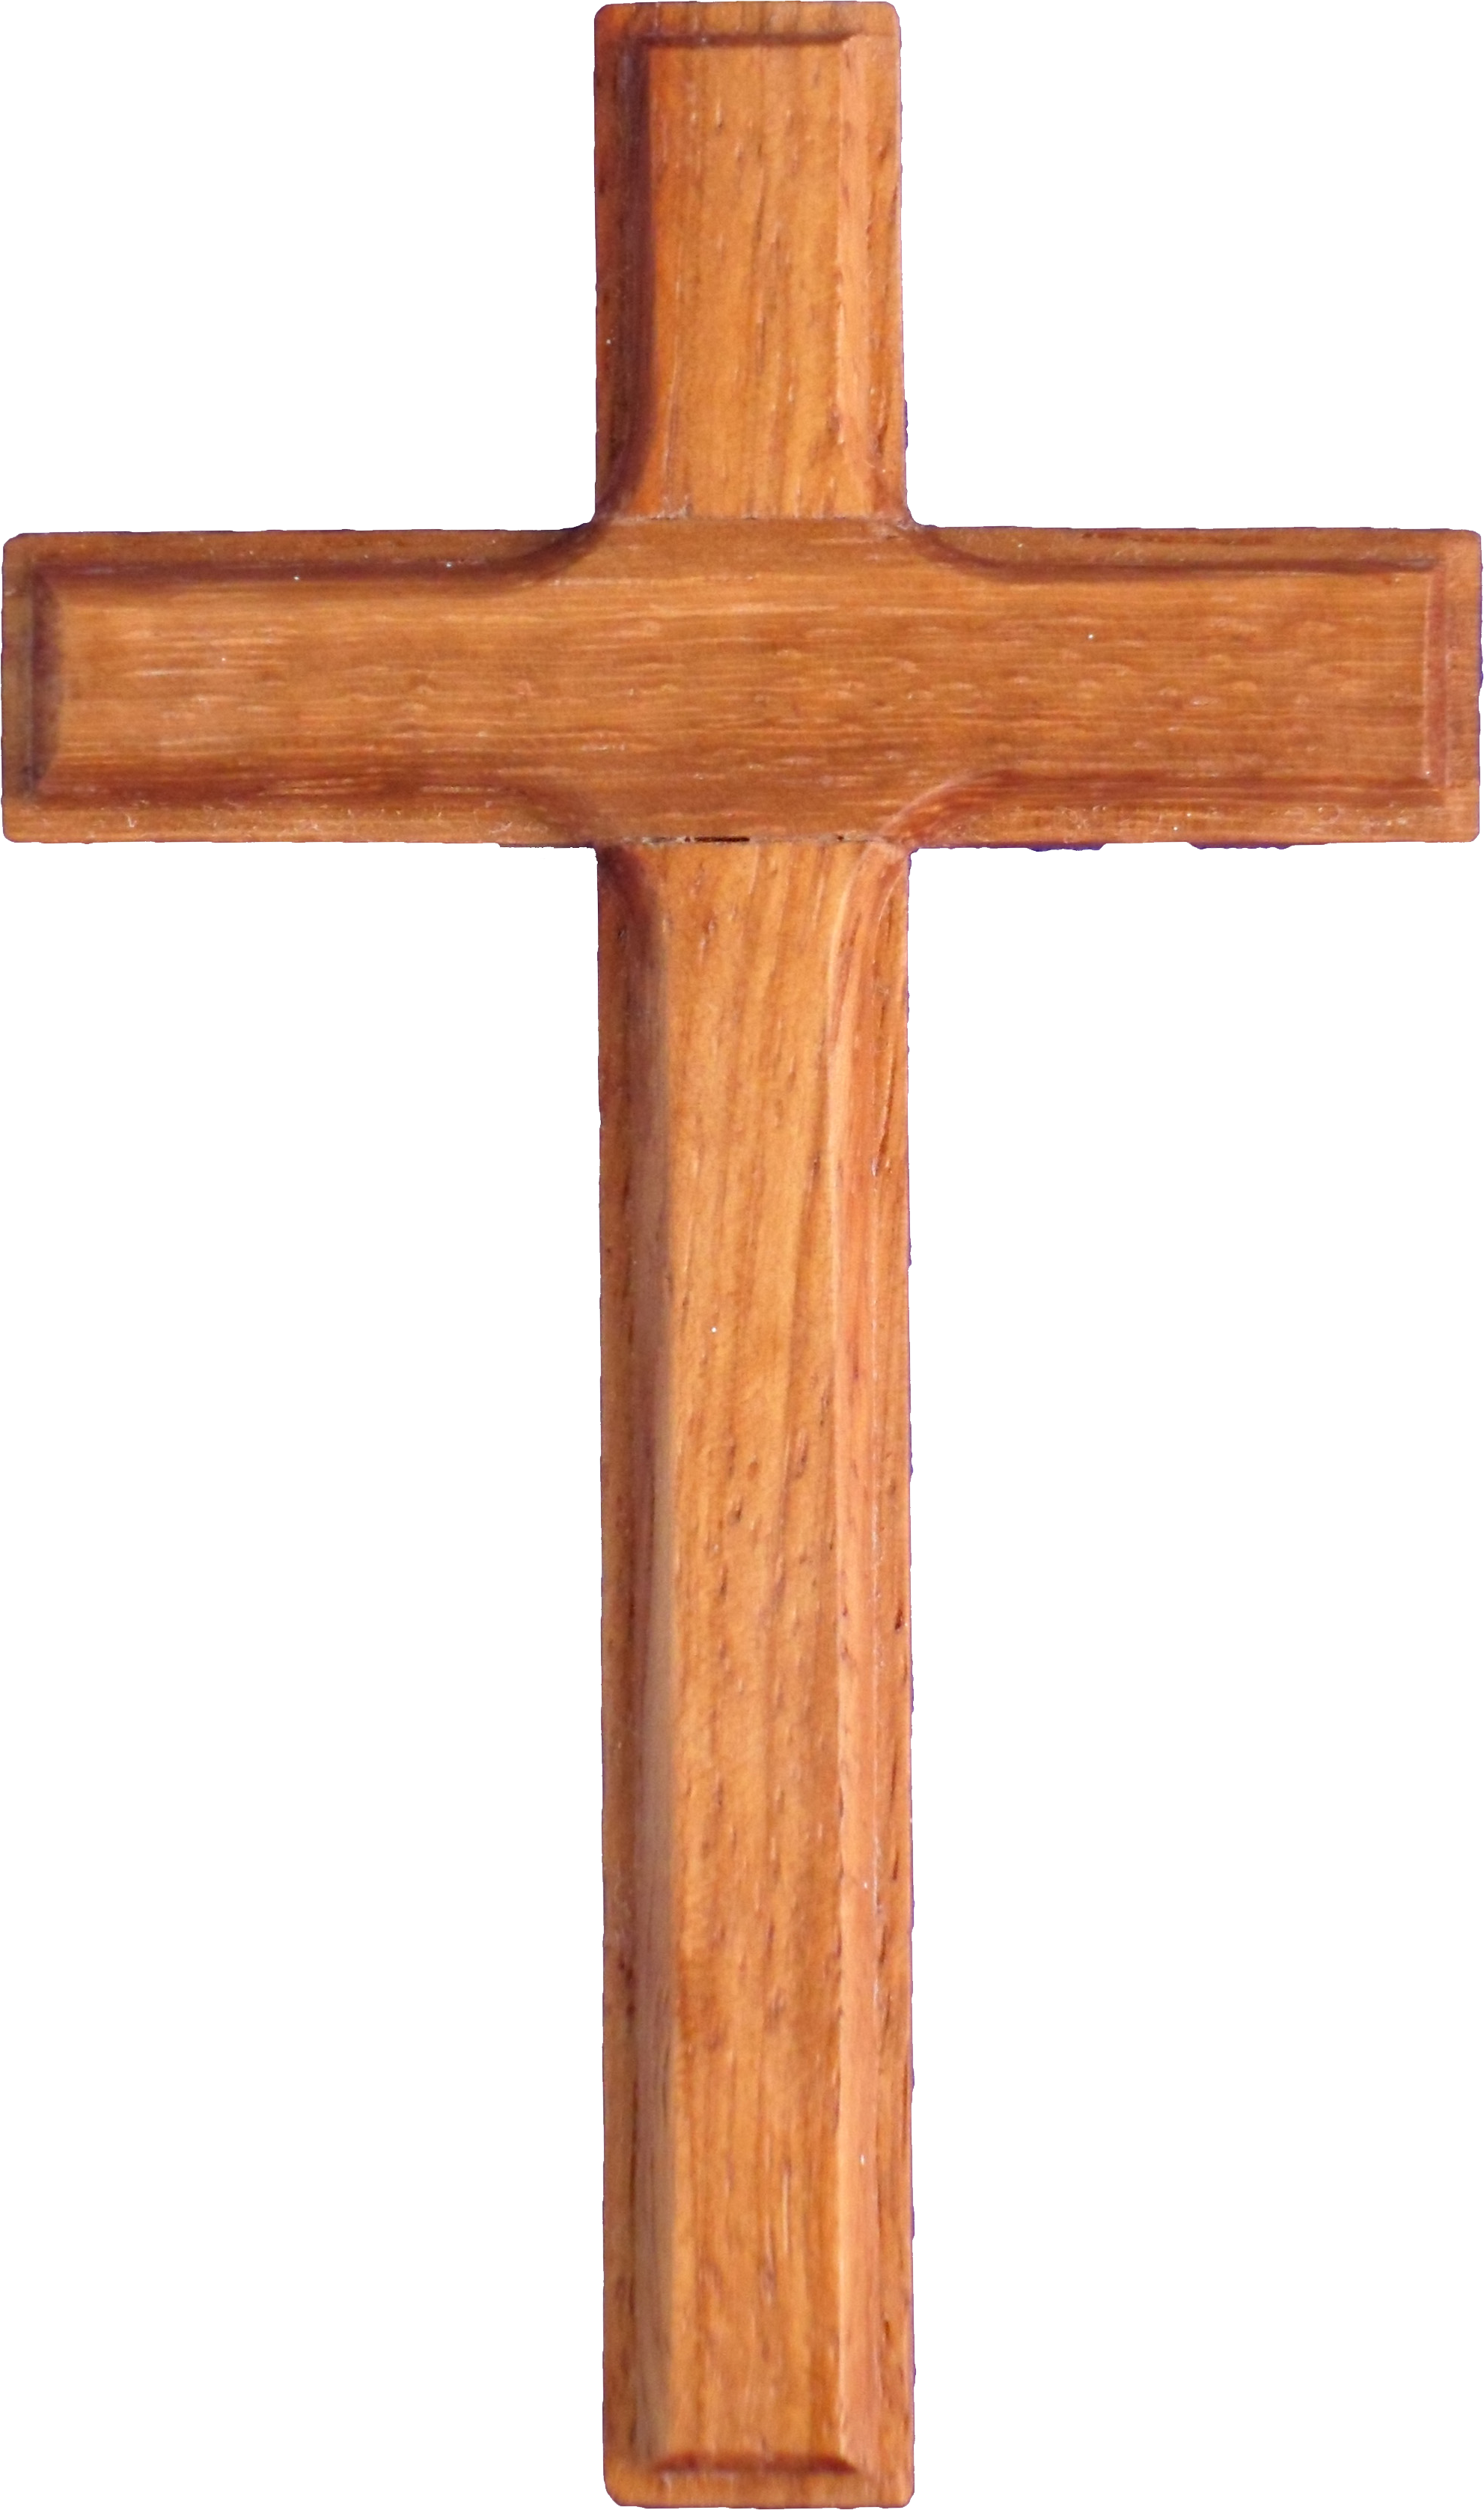 Christian Cross PNG Image PurePNG Free Transparent CC0 PNG Image Library